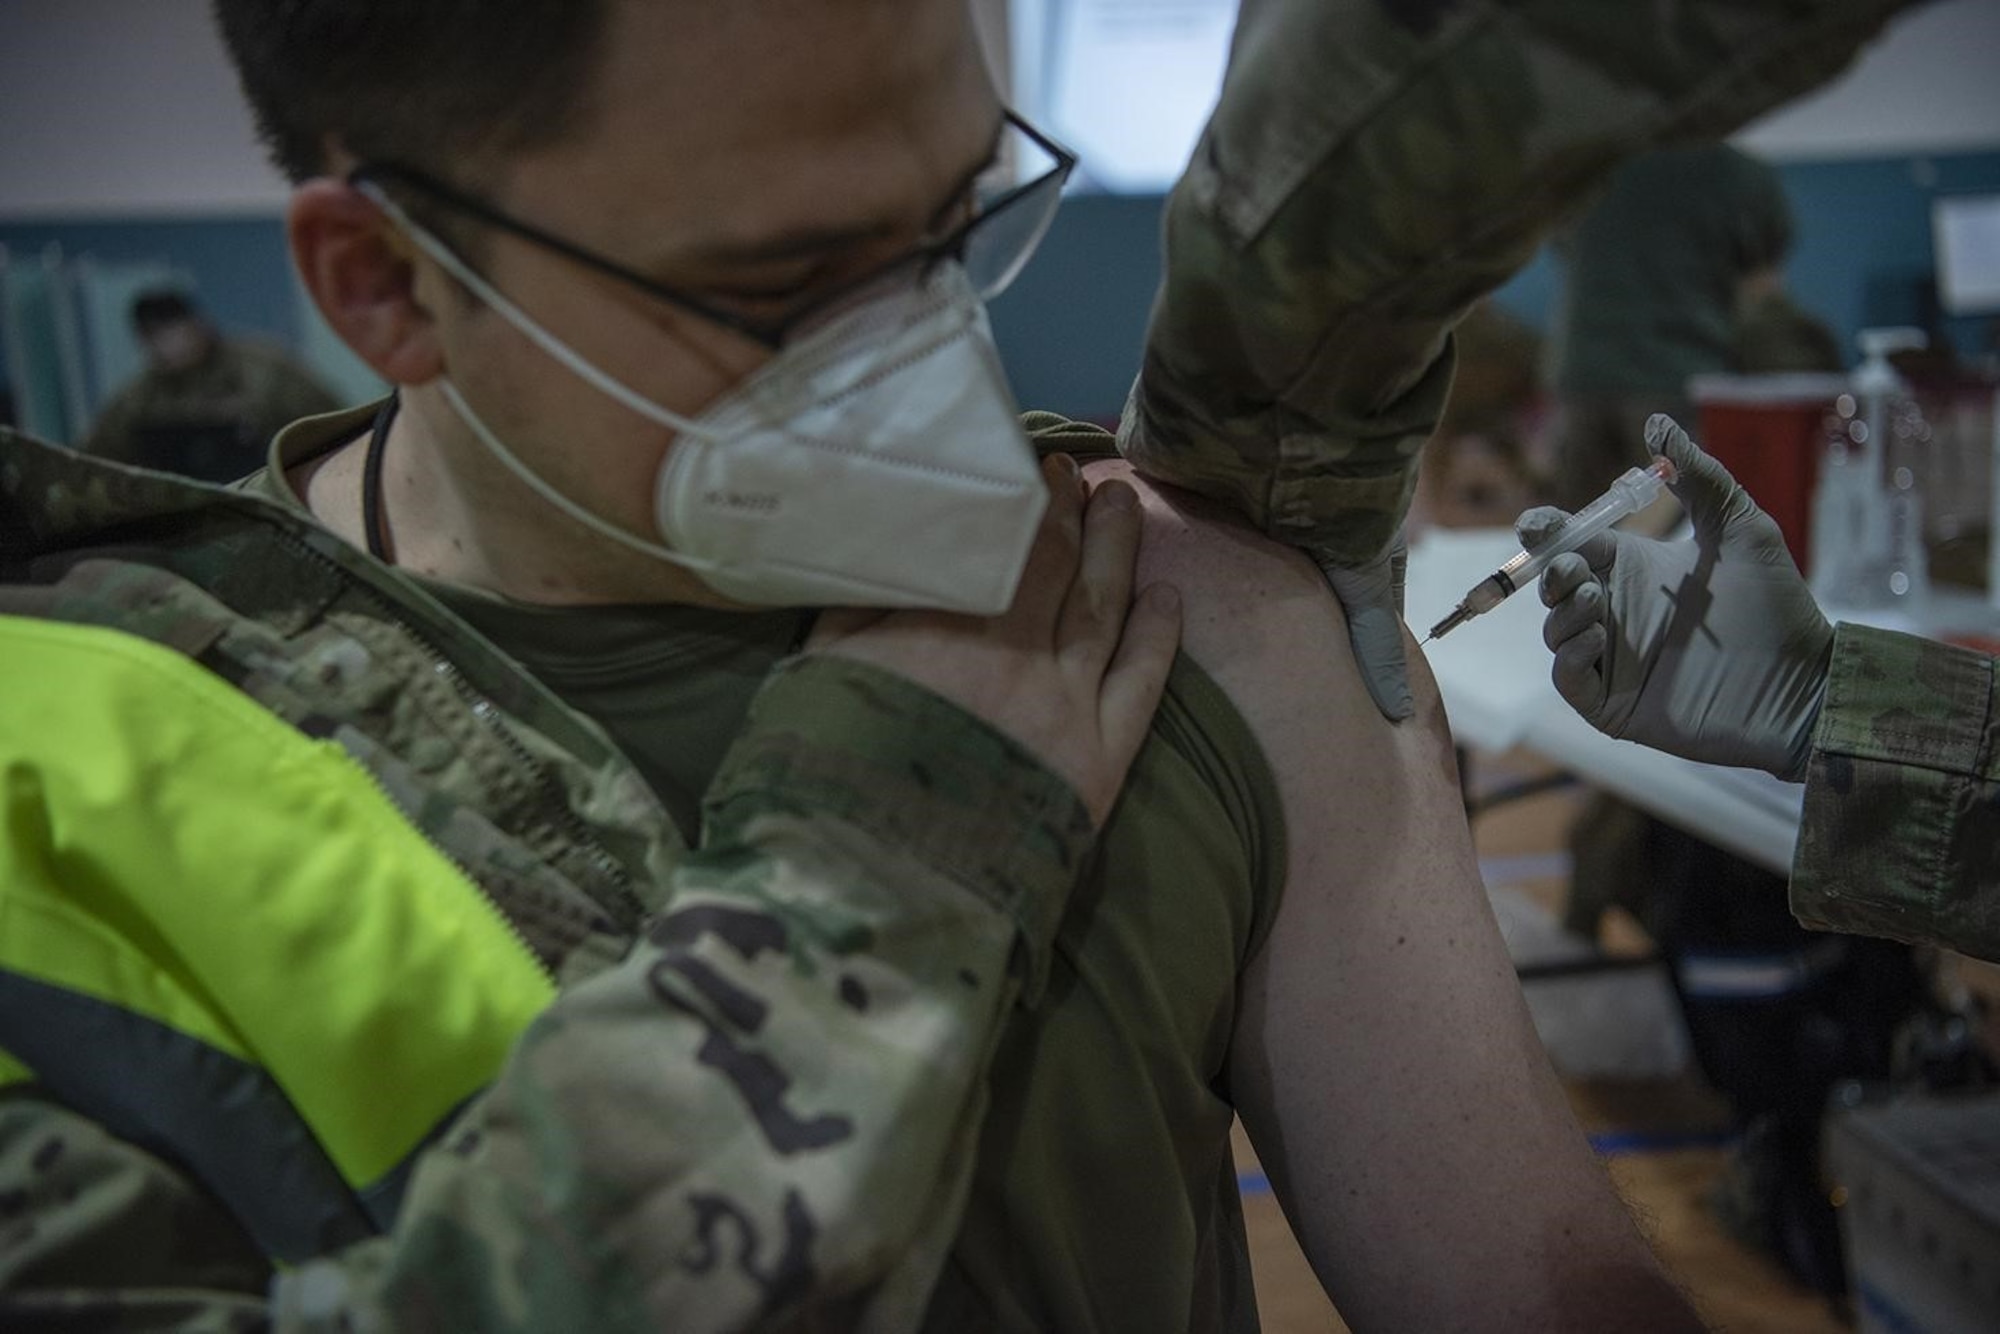 U.S. Air Force Maj. Gregory Baker, 86th Operational Medical Readiness Squadron medical director, receives an initial dose of the COVID-19 vaccine at Ramstein Air Base, Germany, Jan. 4, 2021. Ramstein was one of several overseas military treatment facilities with the capability to receive and distribute the vaccine. (U.S. Air Force photo by Senior Airman Jennifer Gonzales)